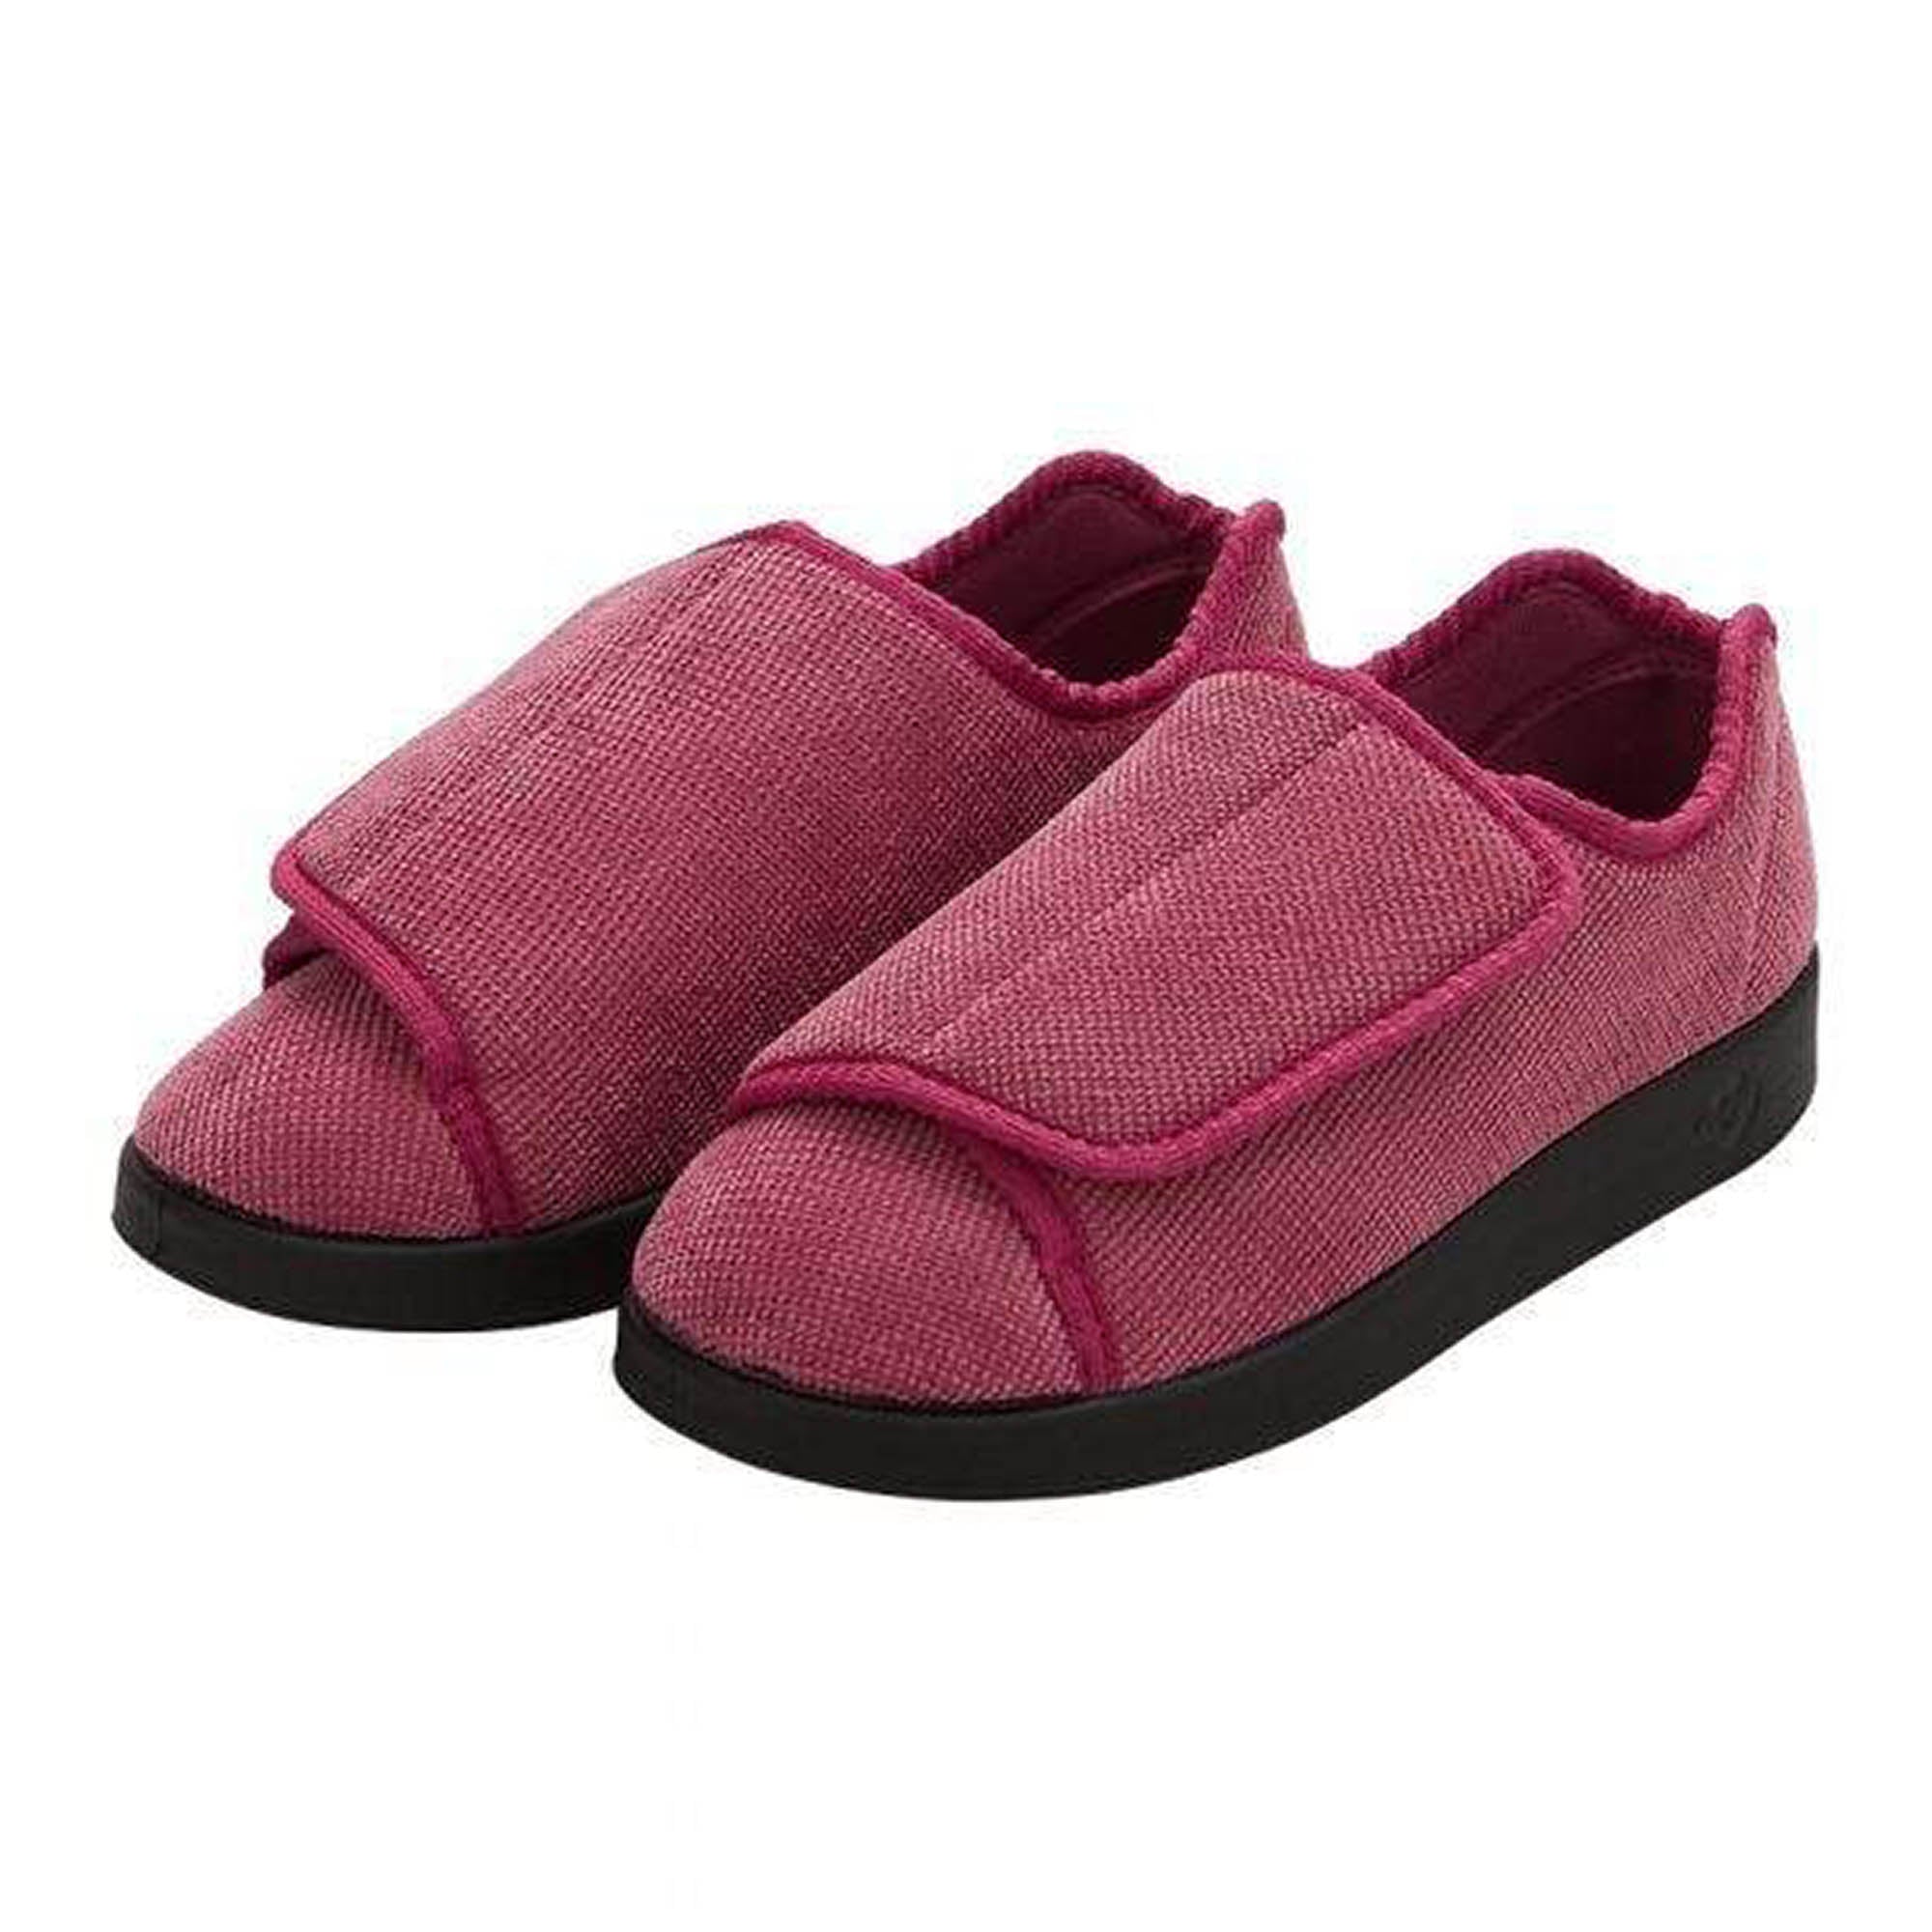 Silverts Women's Antimicrobial Extra Extra Wide Easy-Closure Slippers - Dusty Rose - 10